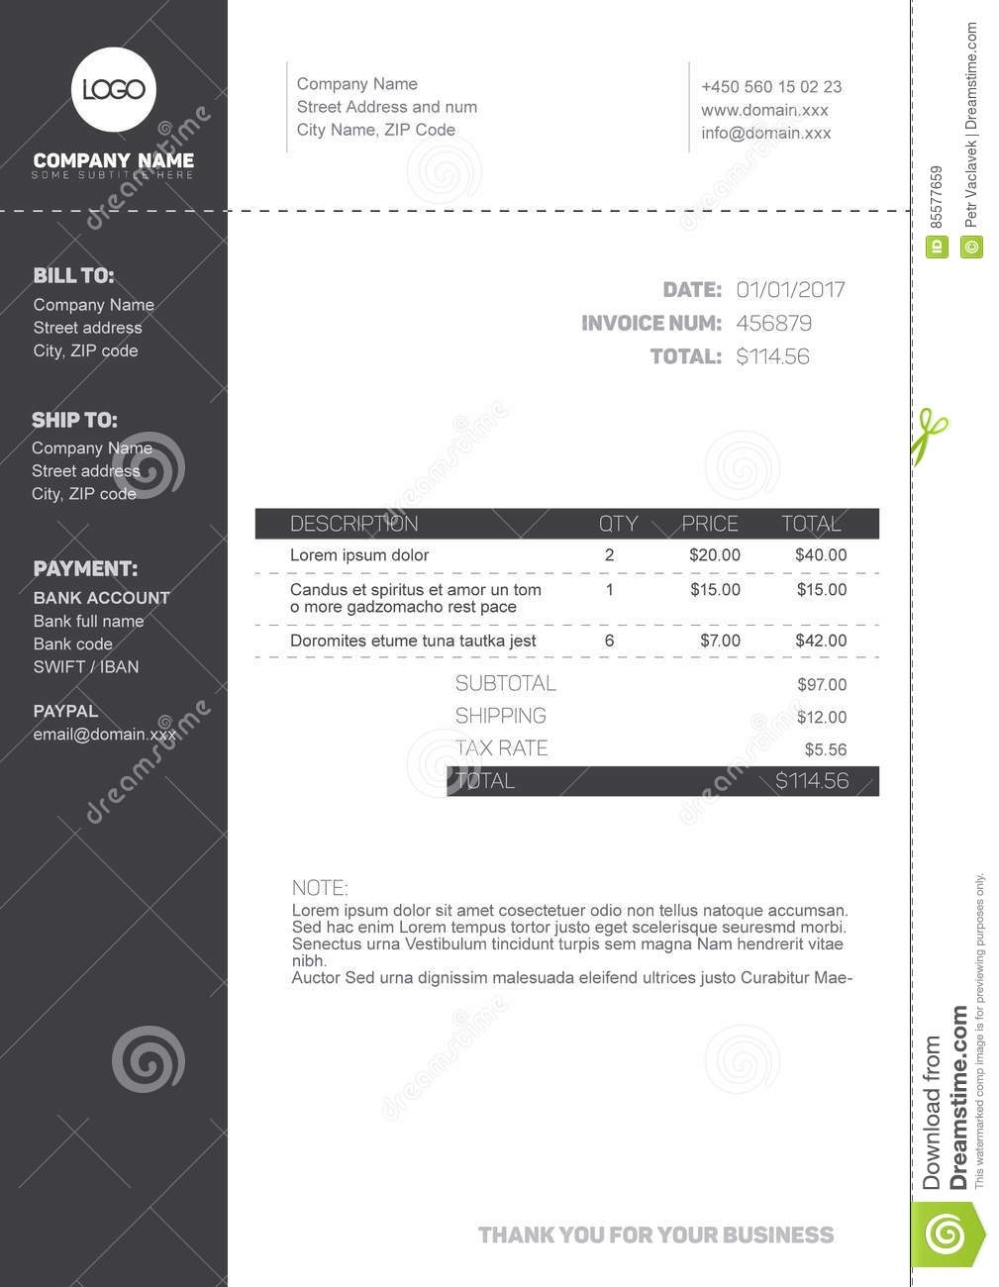 Invoice Template Stock Vector. Illustration Of Company - 85577659 Within Black Invoice Template